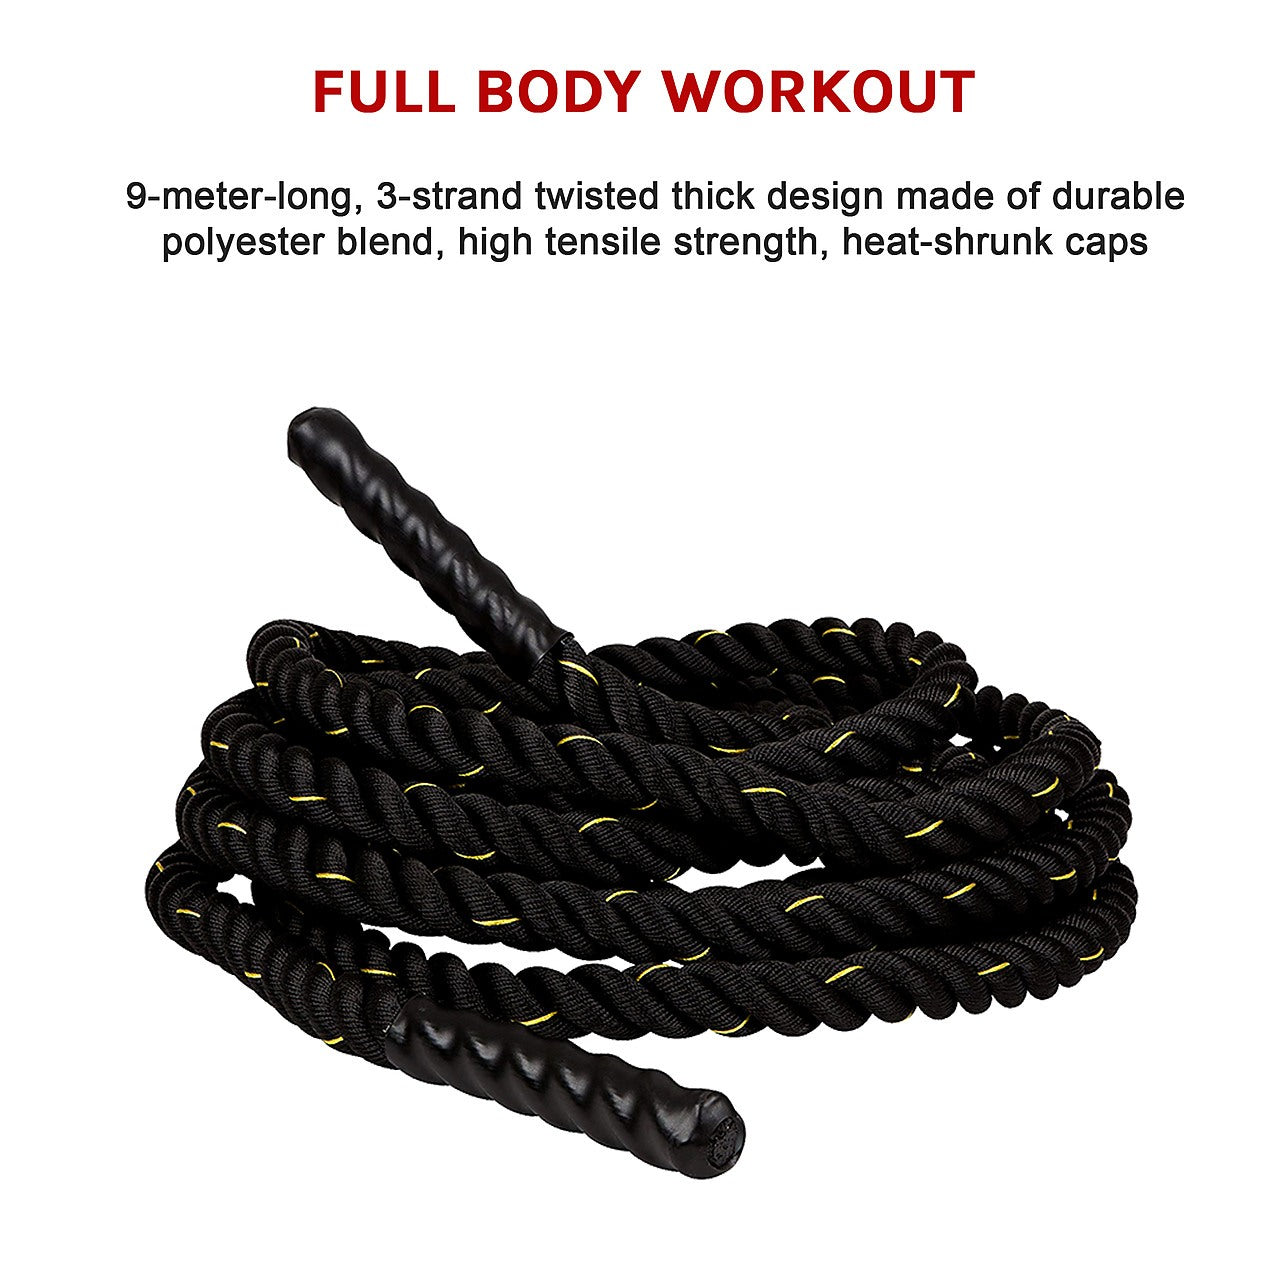 1.5 30FT Poly Dacron Battle Rope Exercise Workout Strength